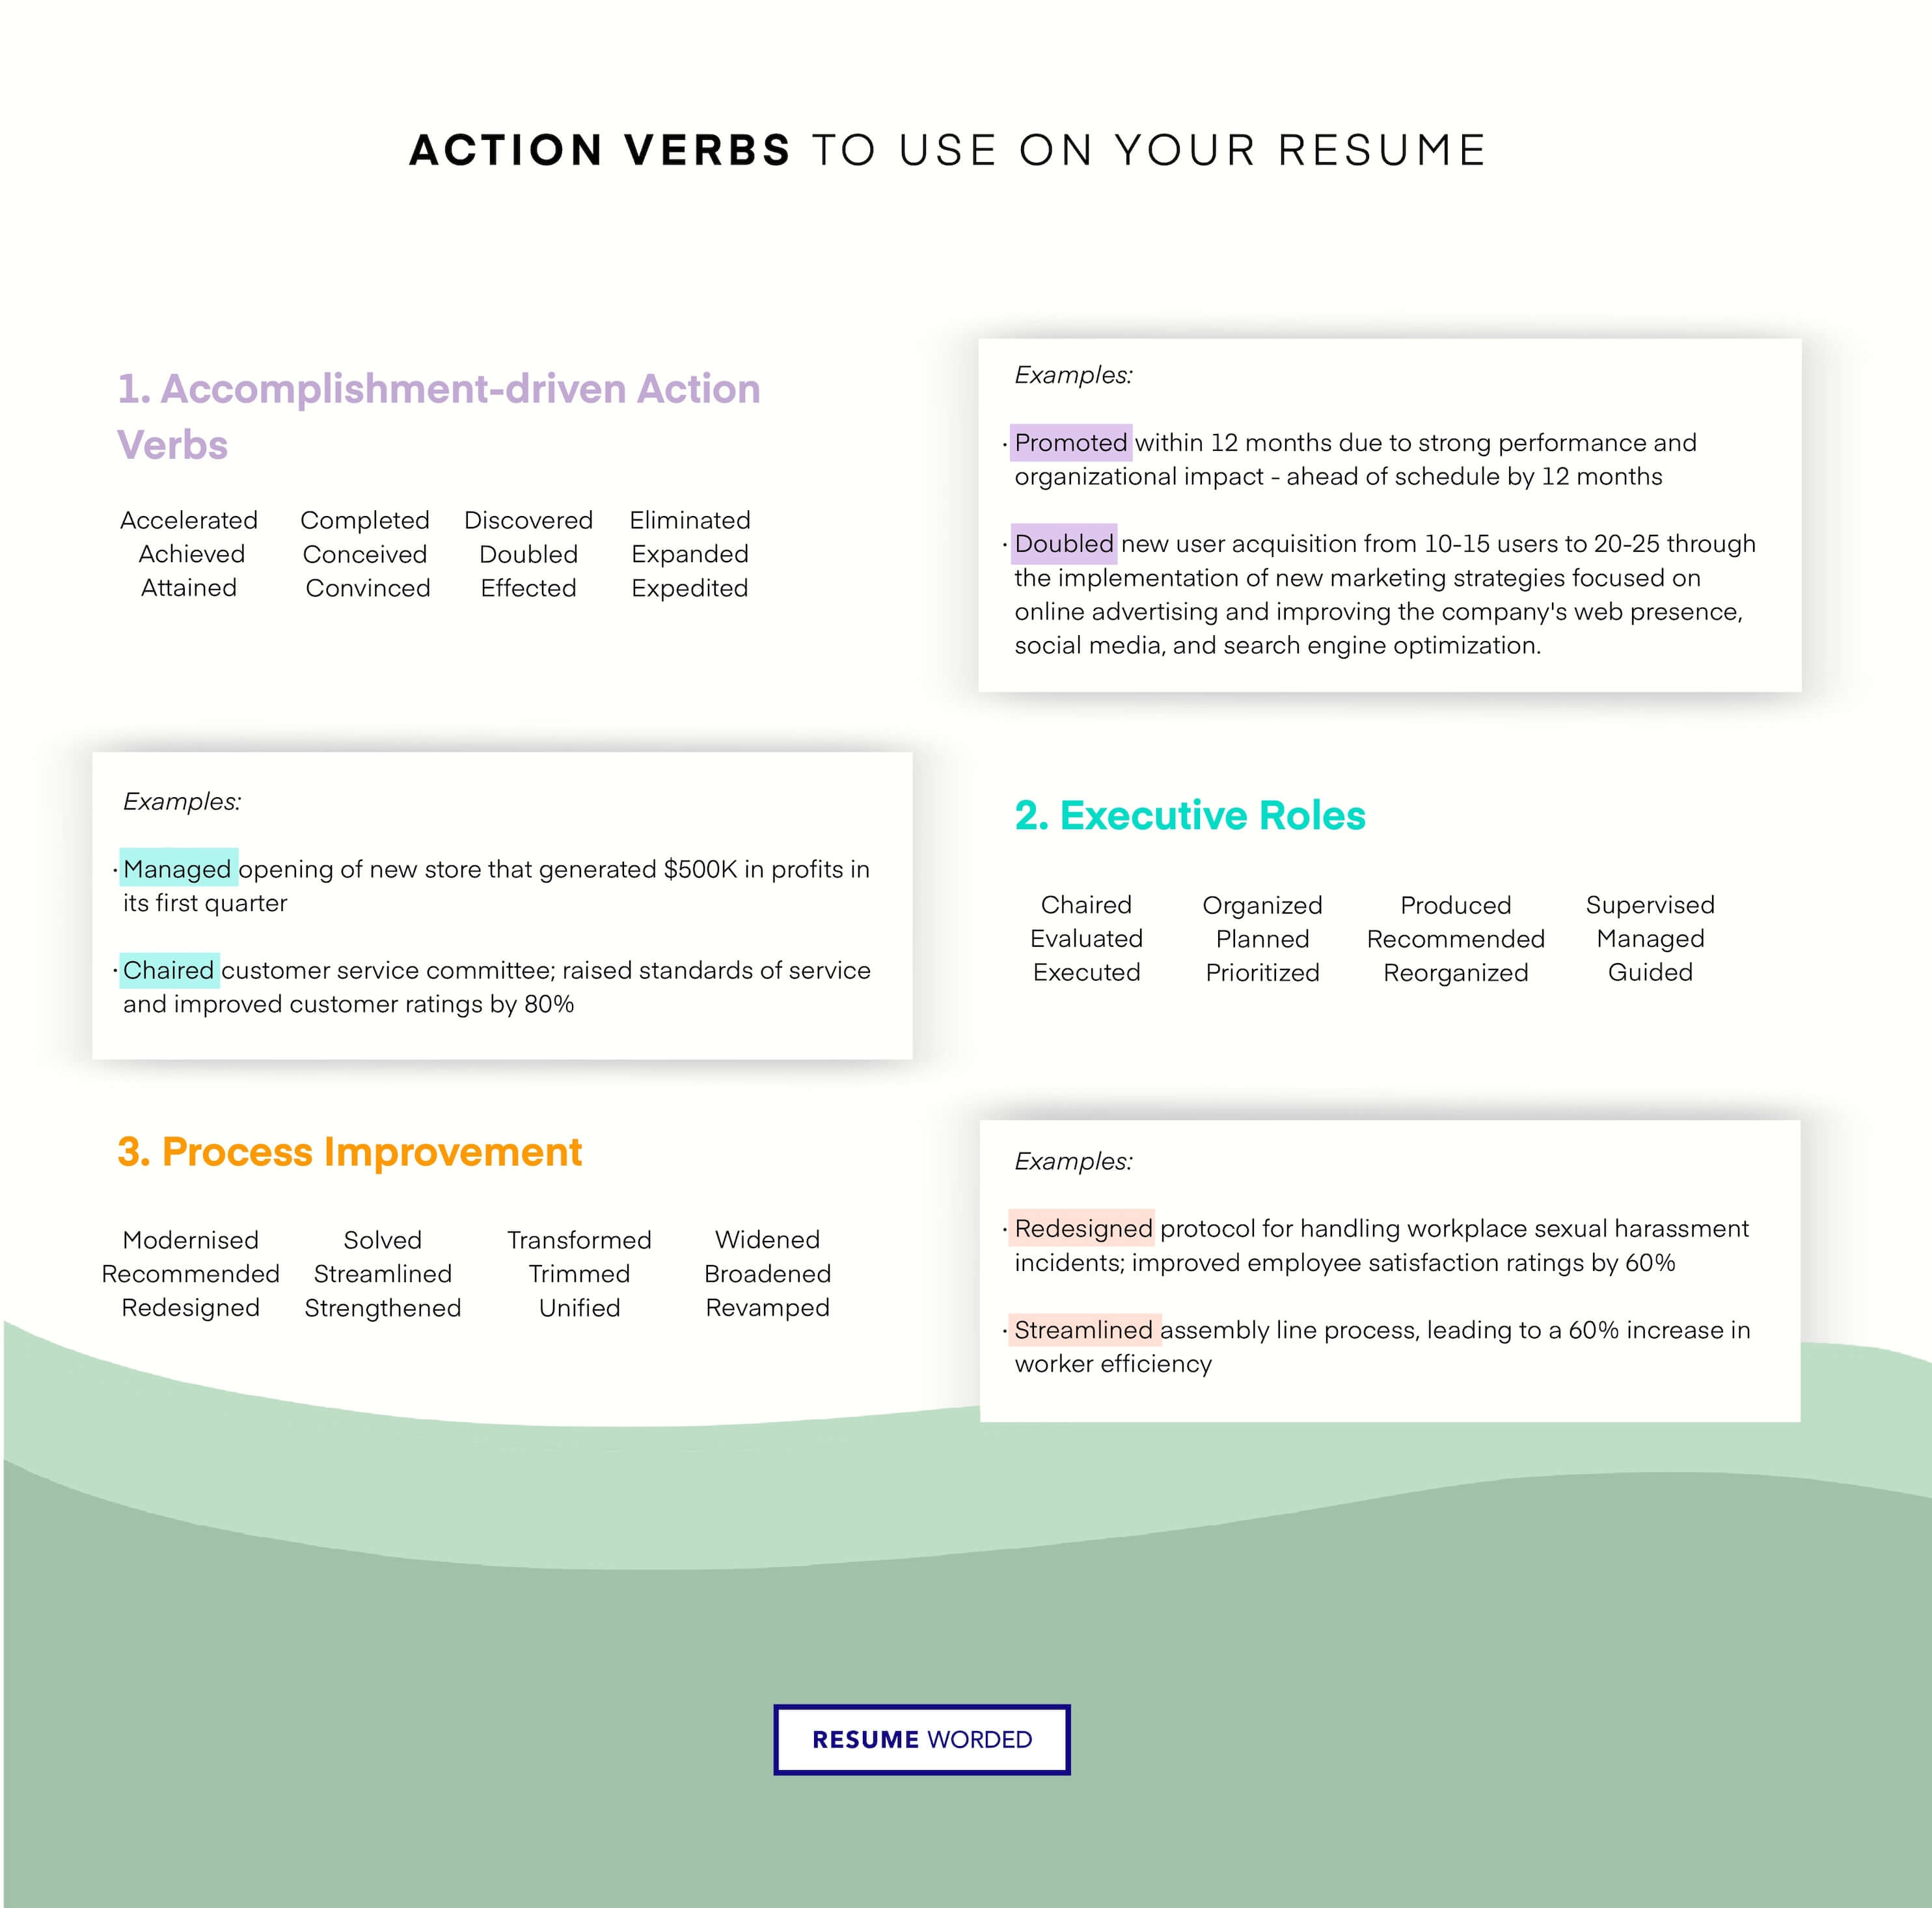 Strong action verbs and measurable results - Social Media Manager Resume